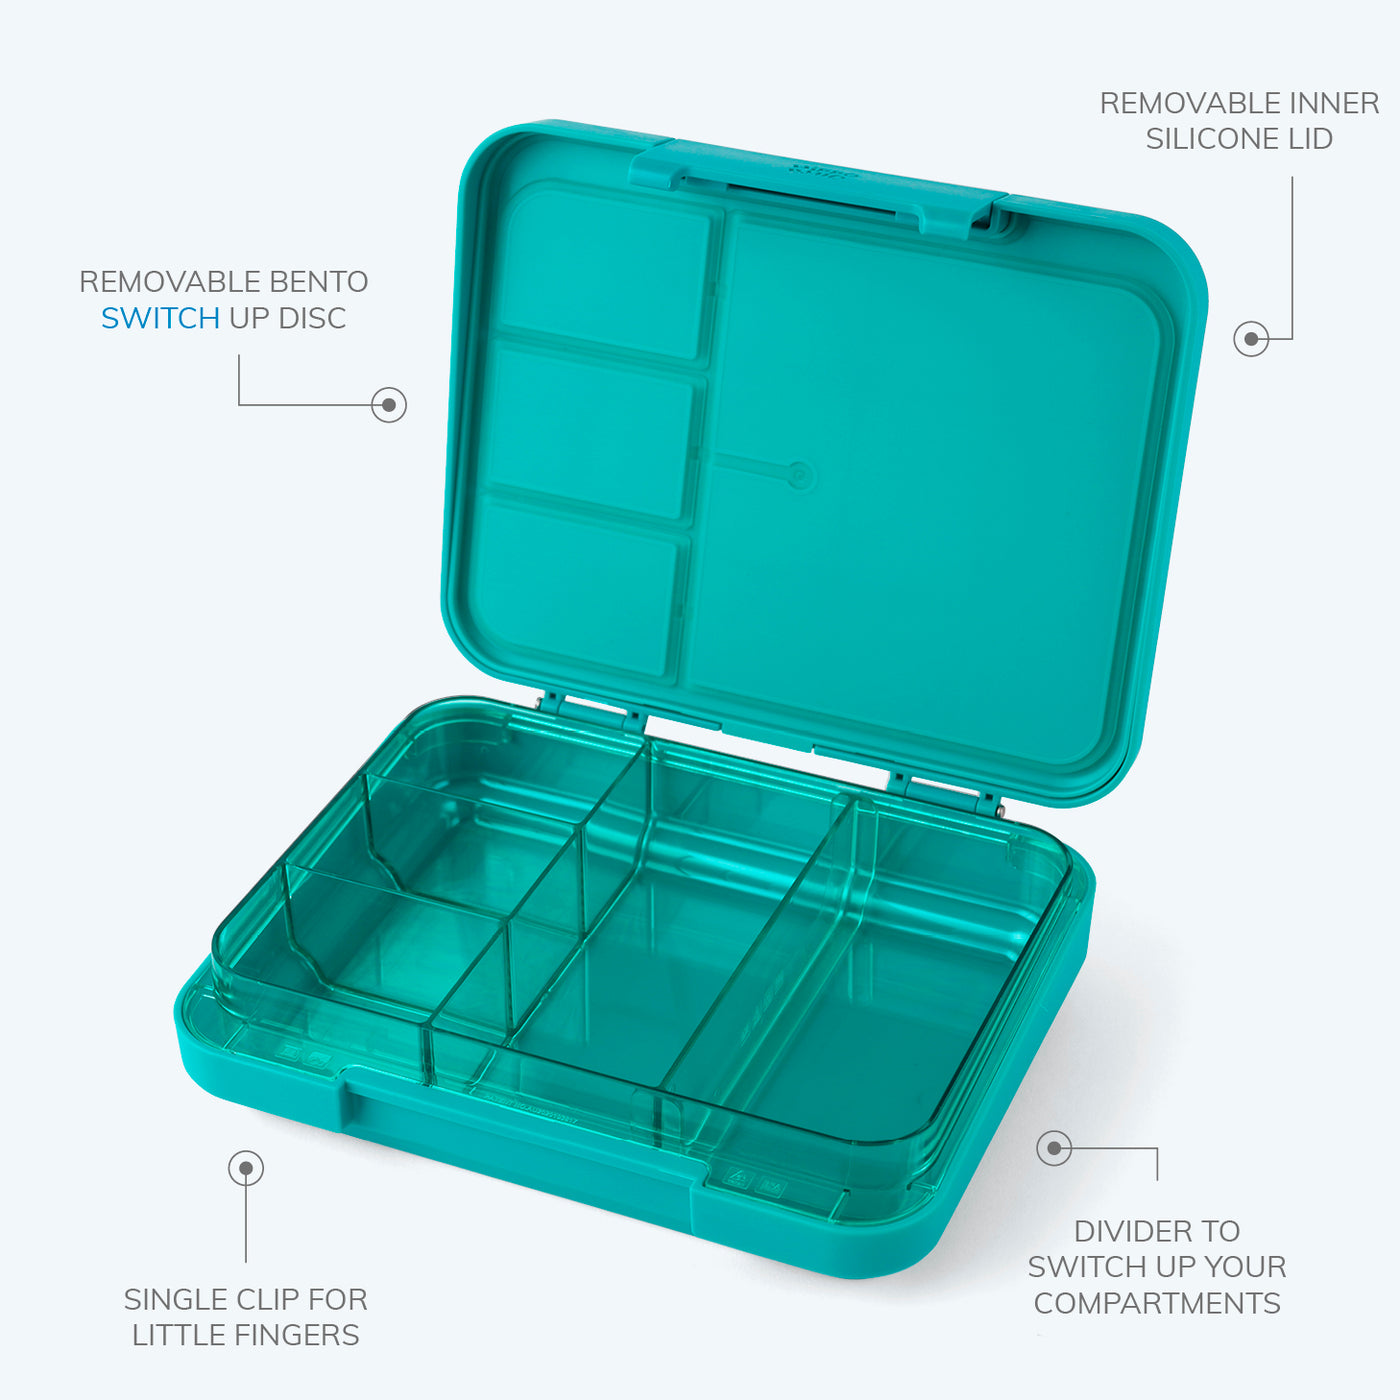 12 lunch containers, bento boxes and more for your kid's litter